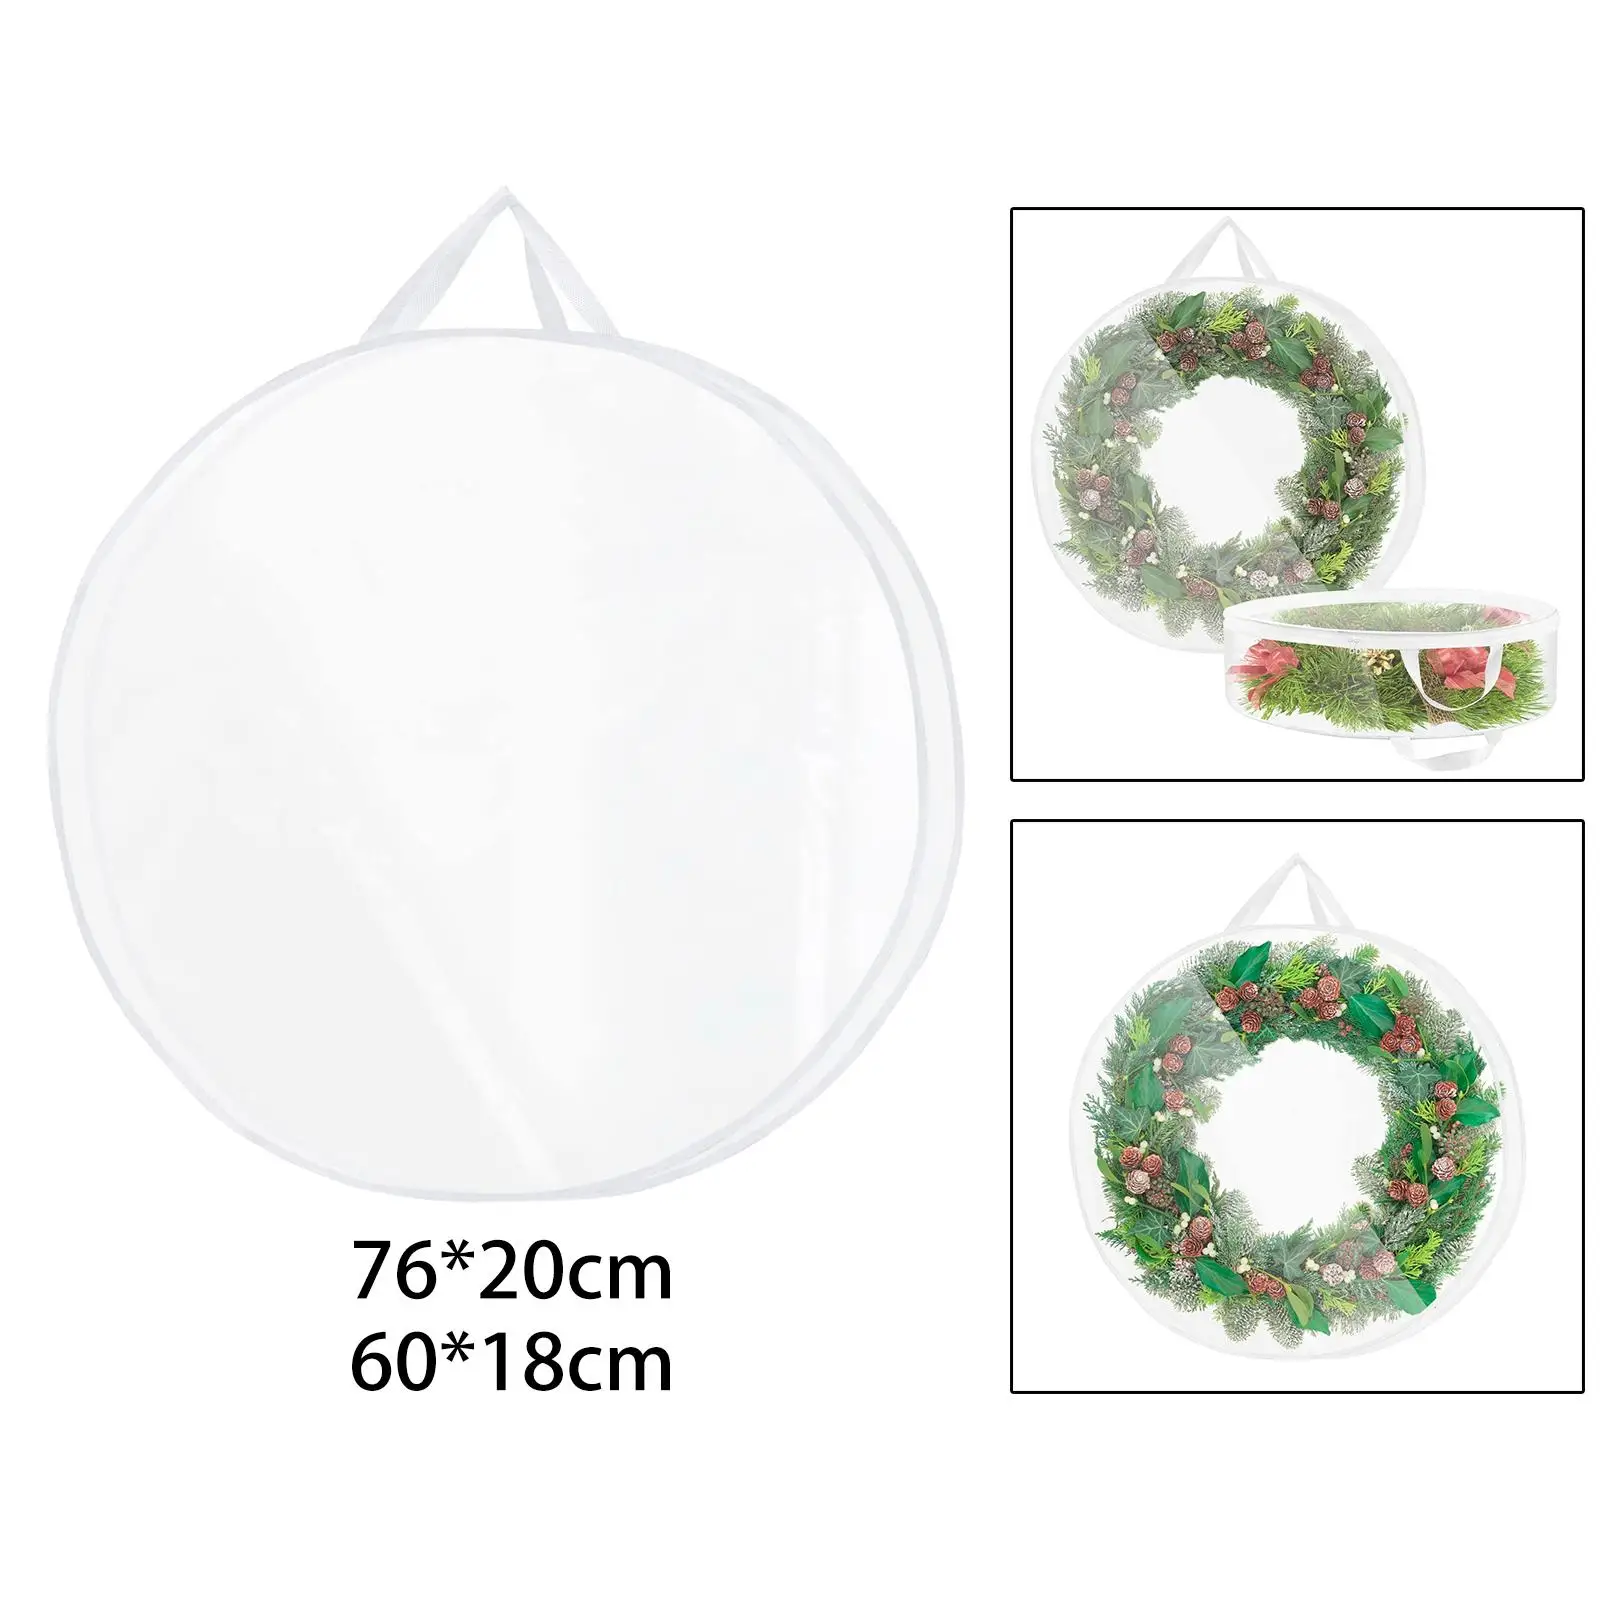 Wreath Storage Bags Round Reusable Portable Dual Zipper Christmas Wreath Storage Container for Xmas Seasonal Holiday Garland